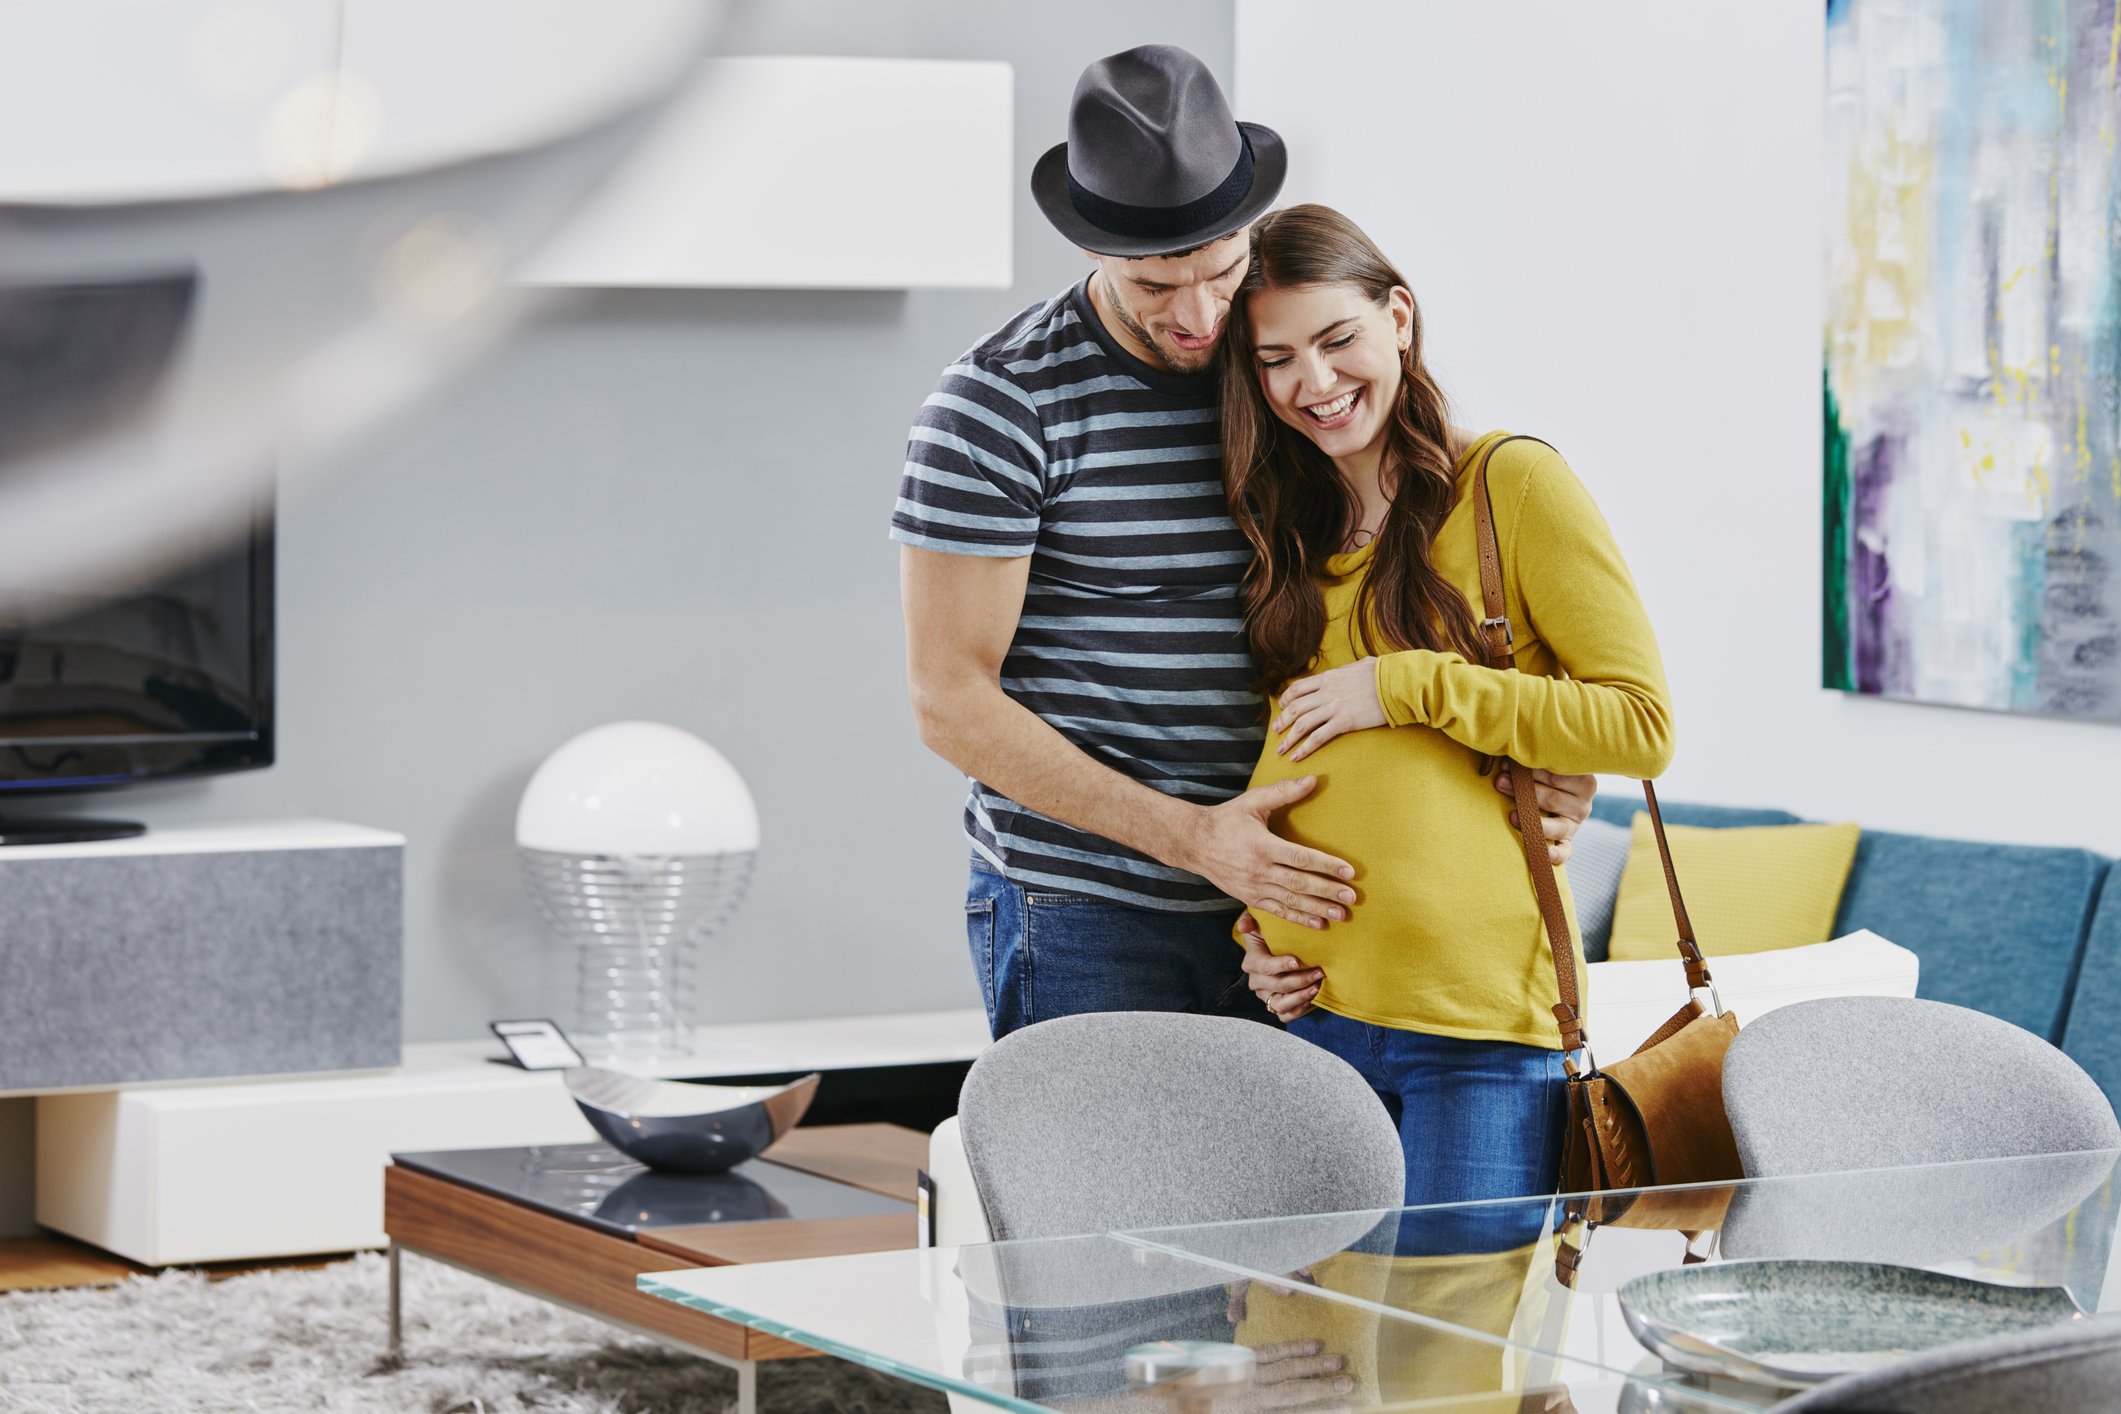 Photo of couple with pregnant woman in furniture store | Photo: Getty Images